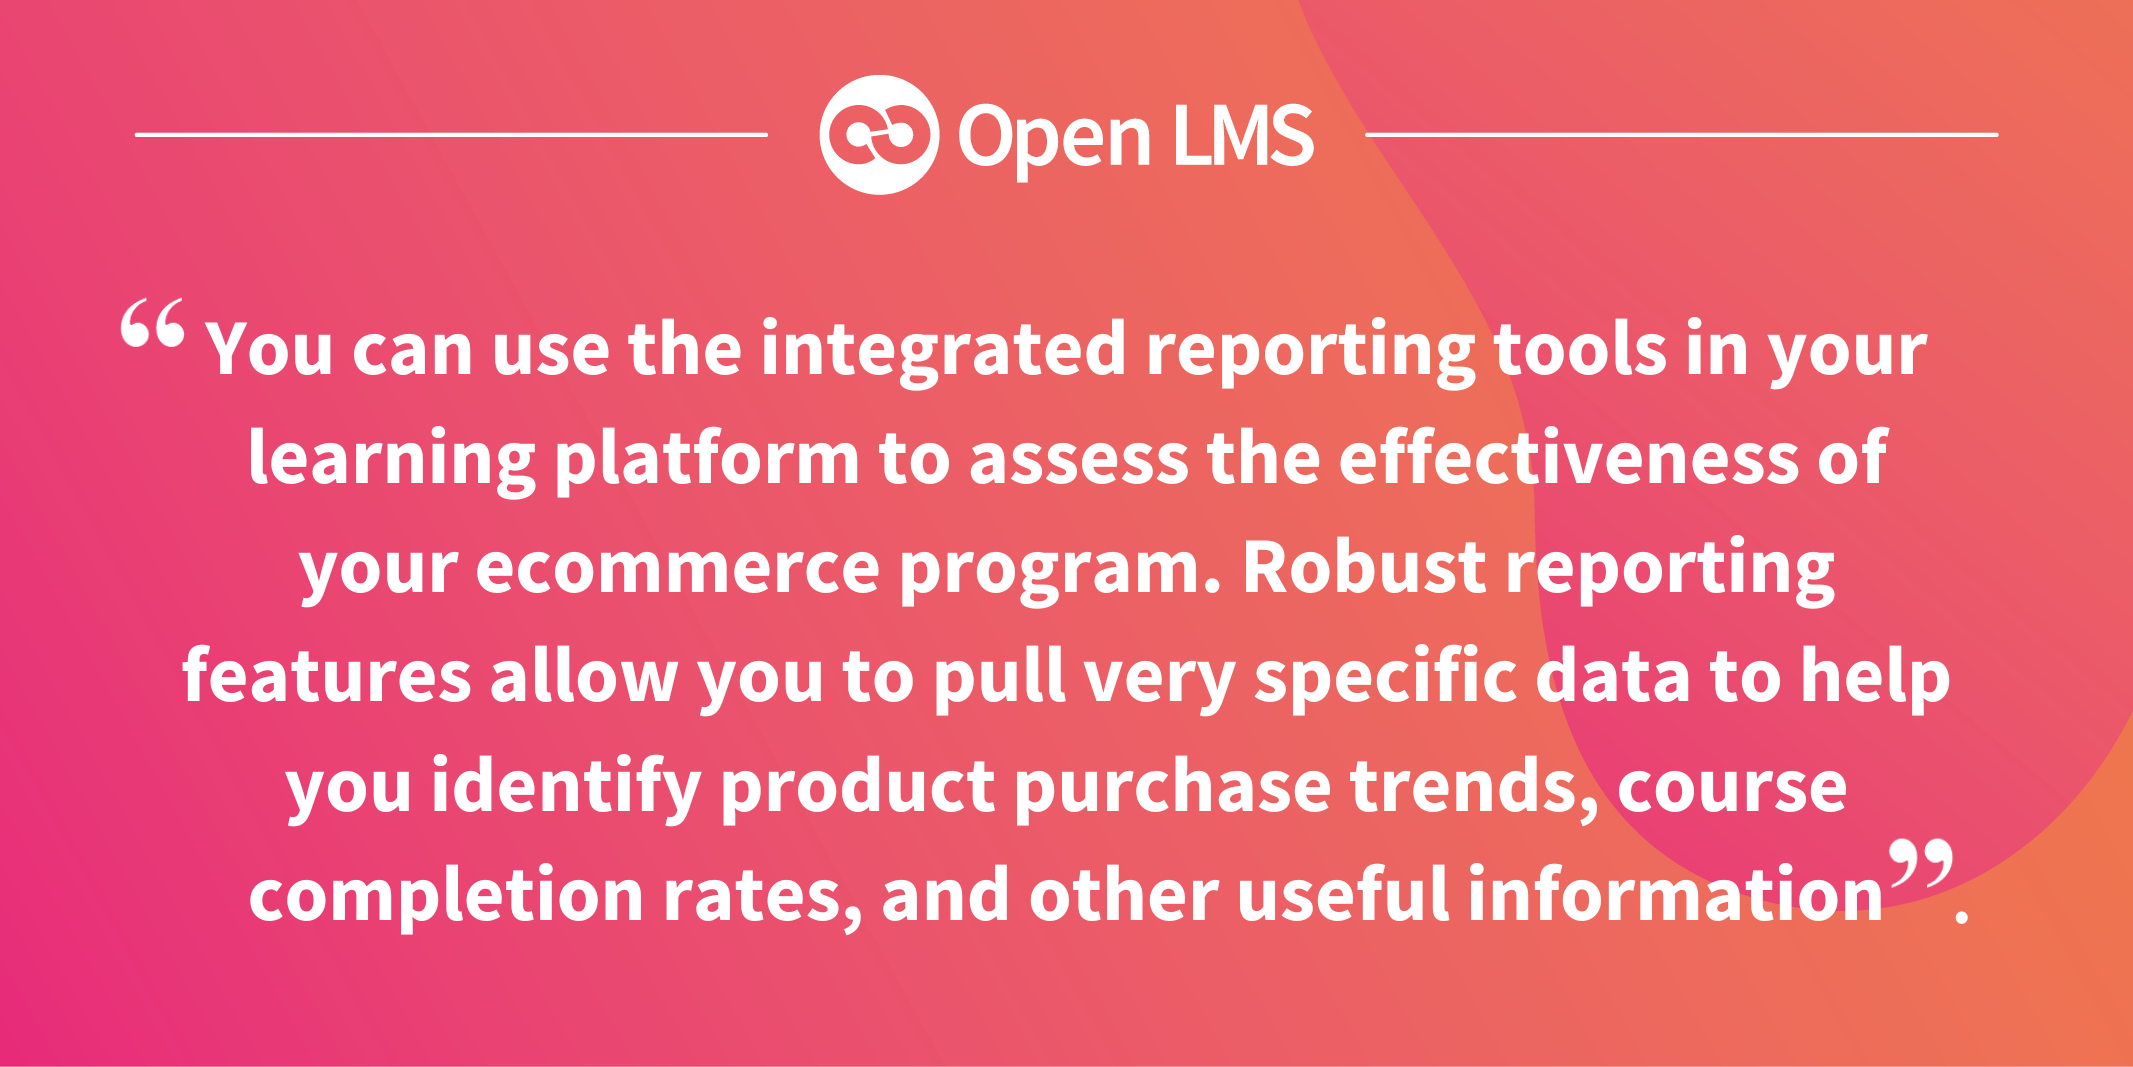 You can use the integrated reporting tools in your learning platform to assess the effectiveness of your ecommerce program. Robust reporting features allow you to pull very specific data to help you identify product purchase trends, course completion rates, and other useful information